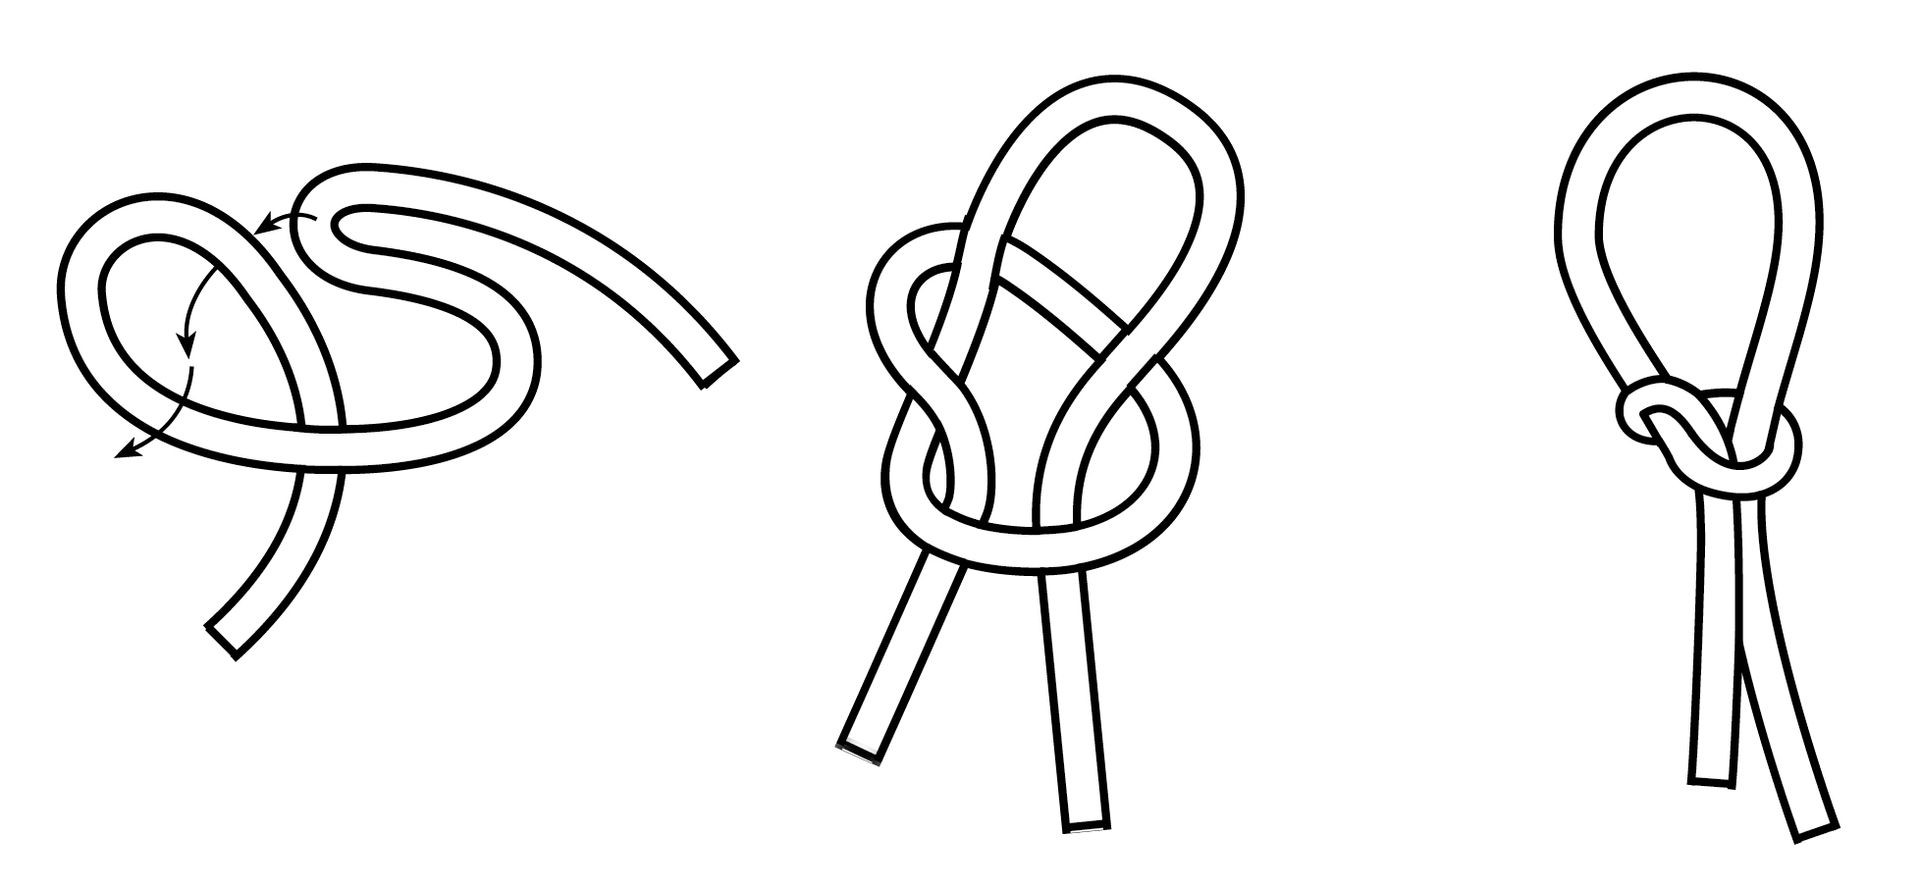 A diagram showing how a snare is tied.